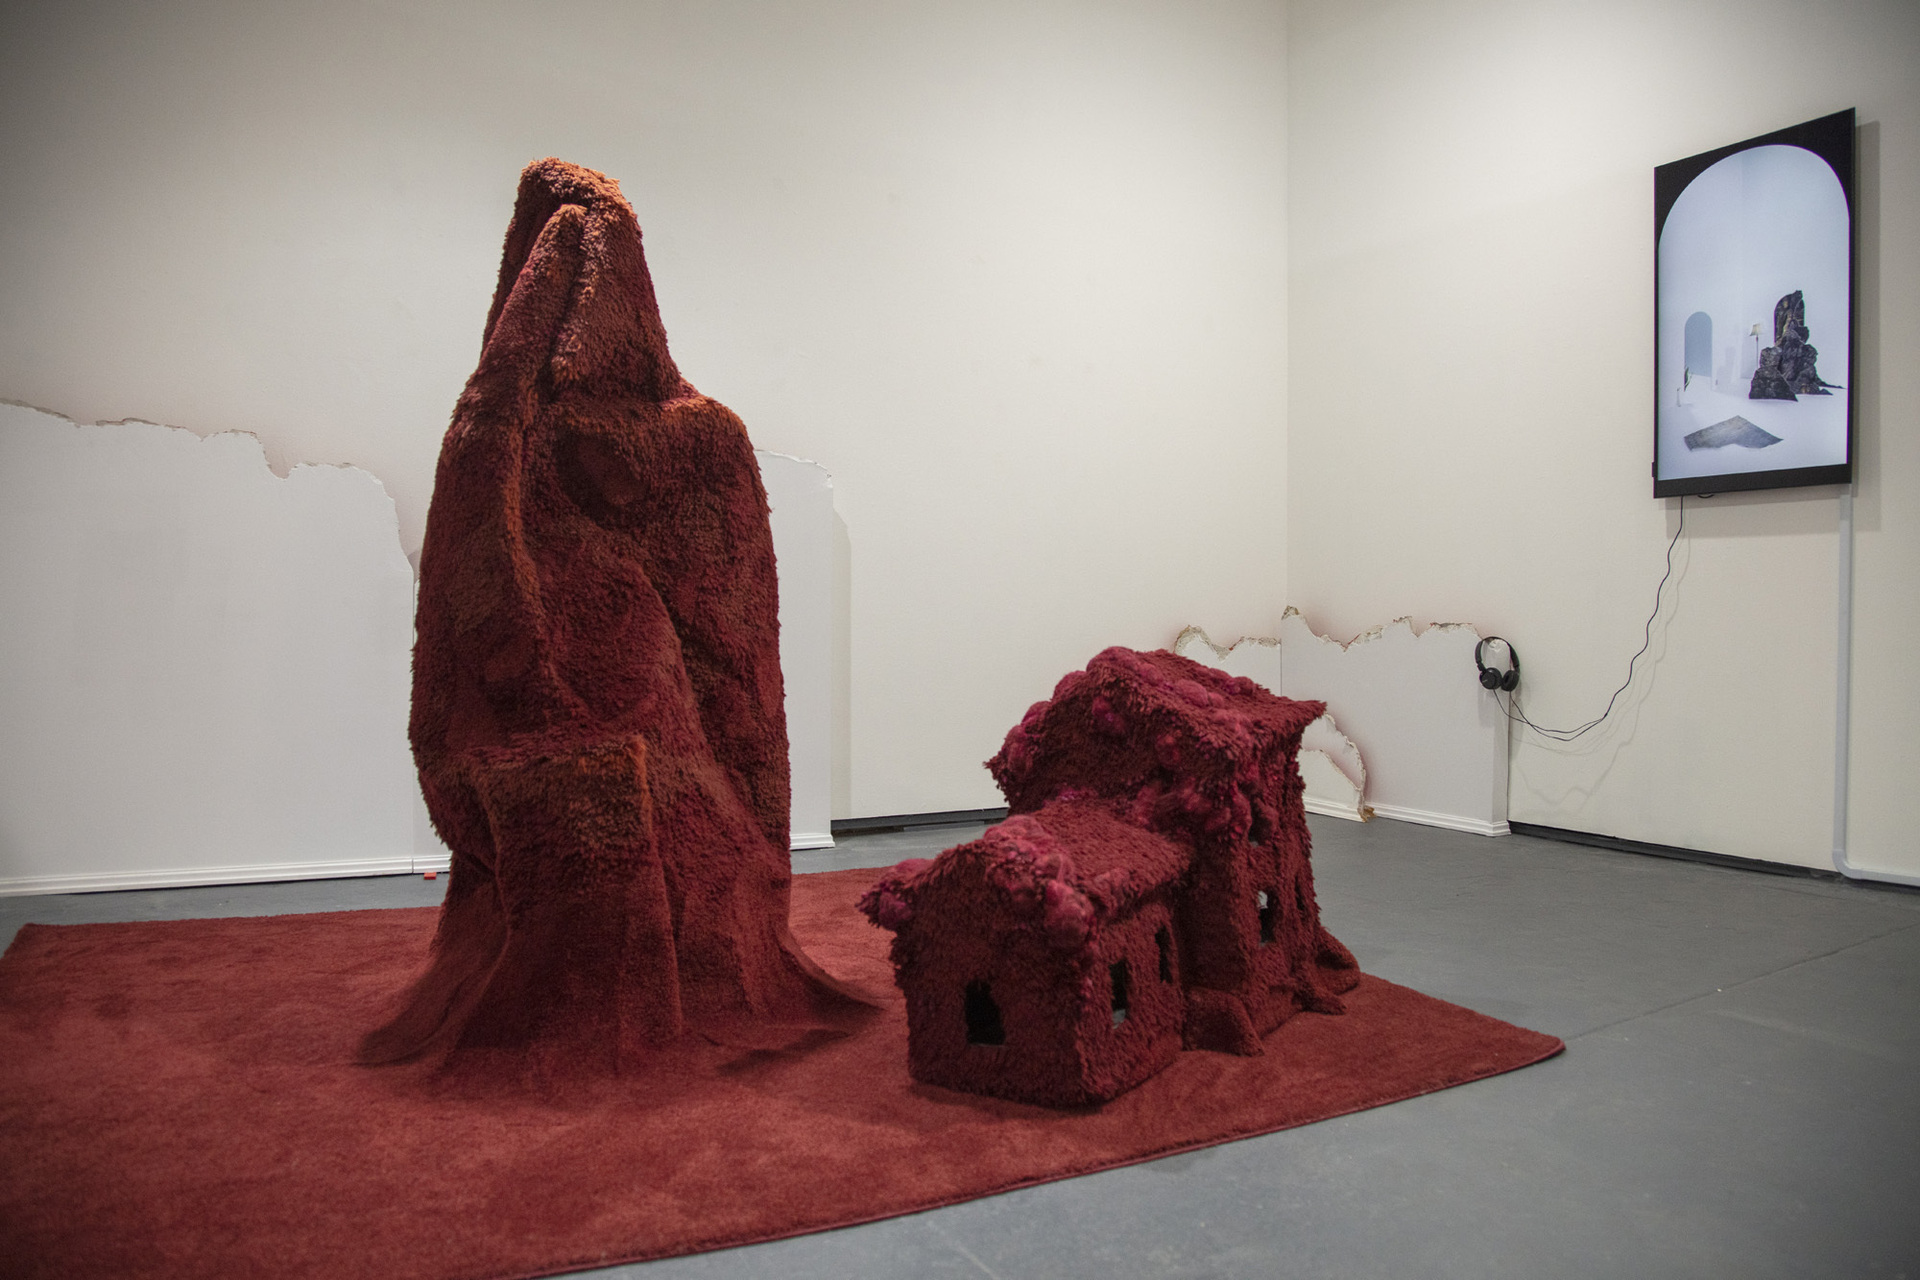 Kate Stone, Dust Bunnies and Mineral Patience, 2020, Carpet, wool, wire, wood, 6'6" x 8'2" x 5'3"